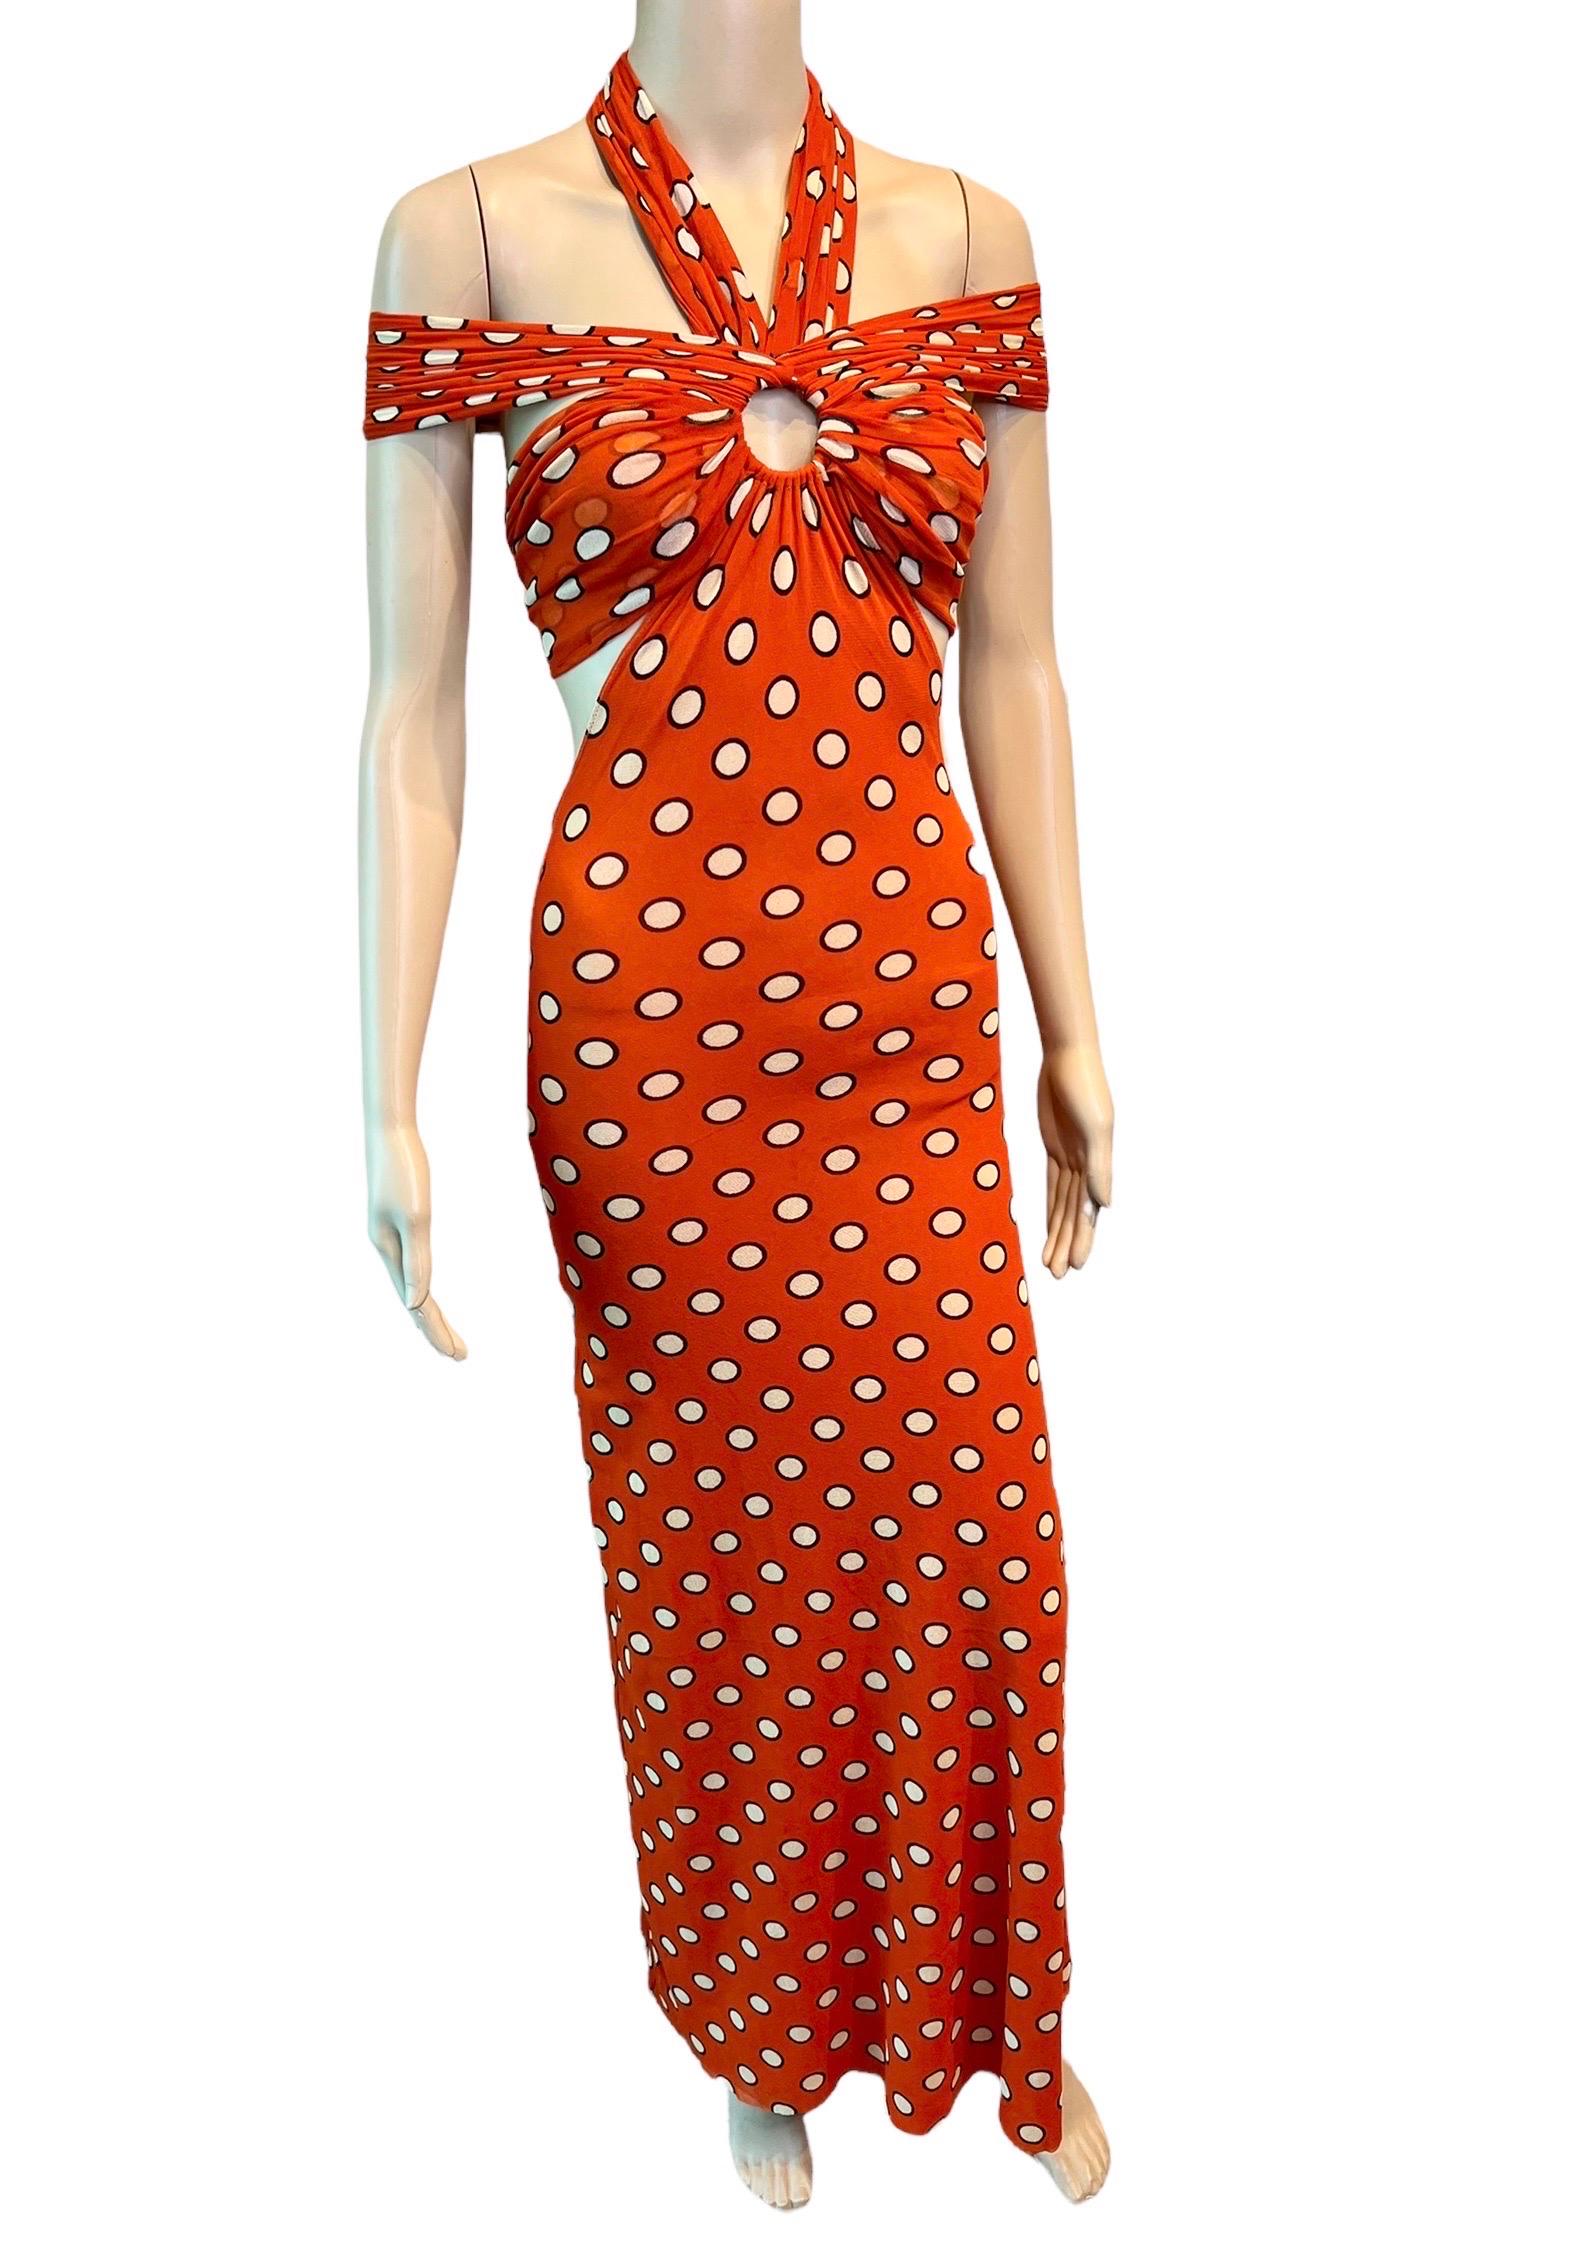 Jean Paul Gaultier Soleil S/S 1999 Cutout Polka Dot Mesh Bodycon Maxi Dress In Excellent Condition For Sale In Naples, FL